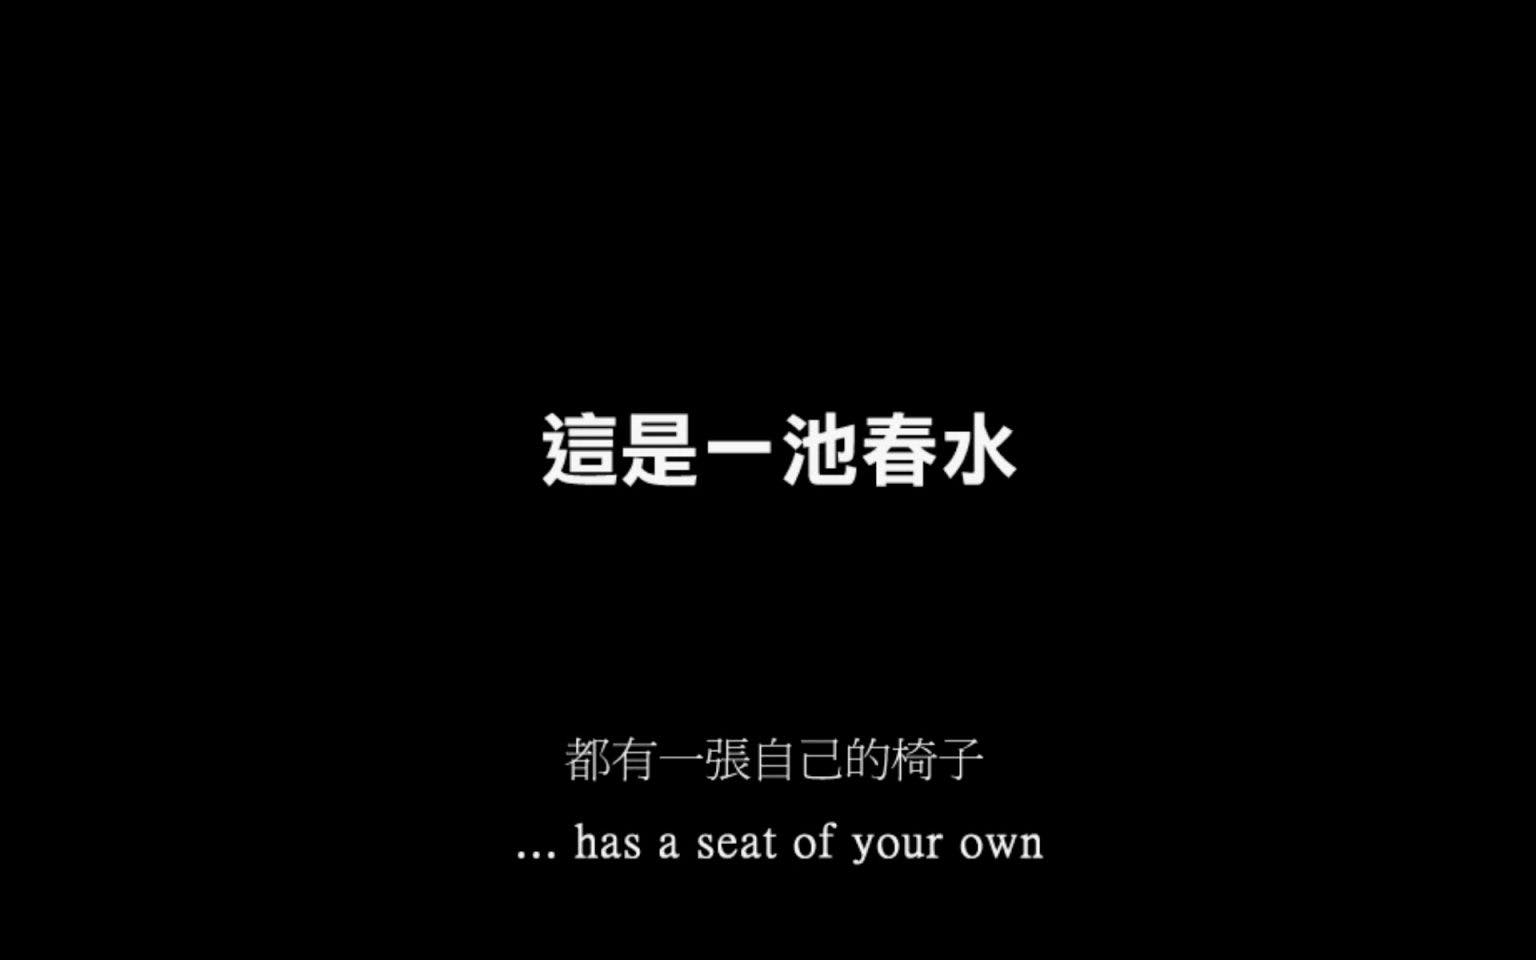 This is A Chair 這是一張椅子